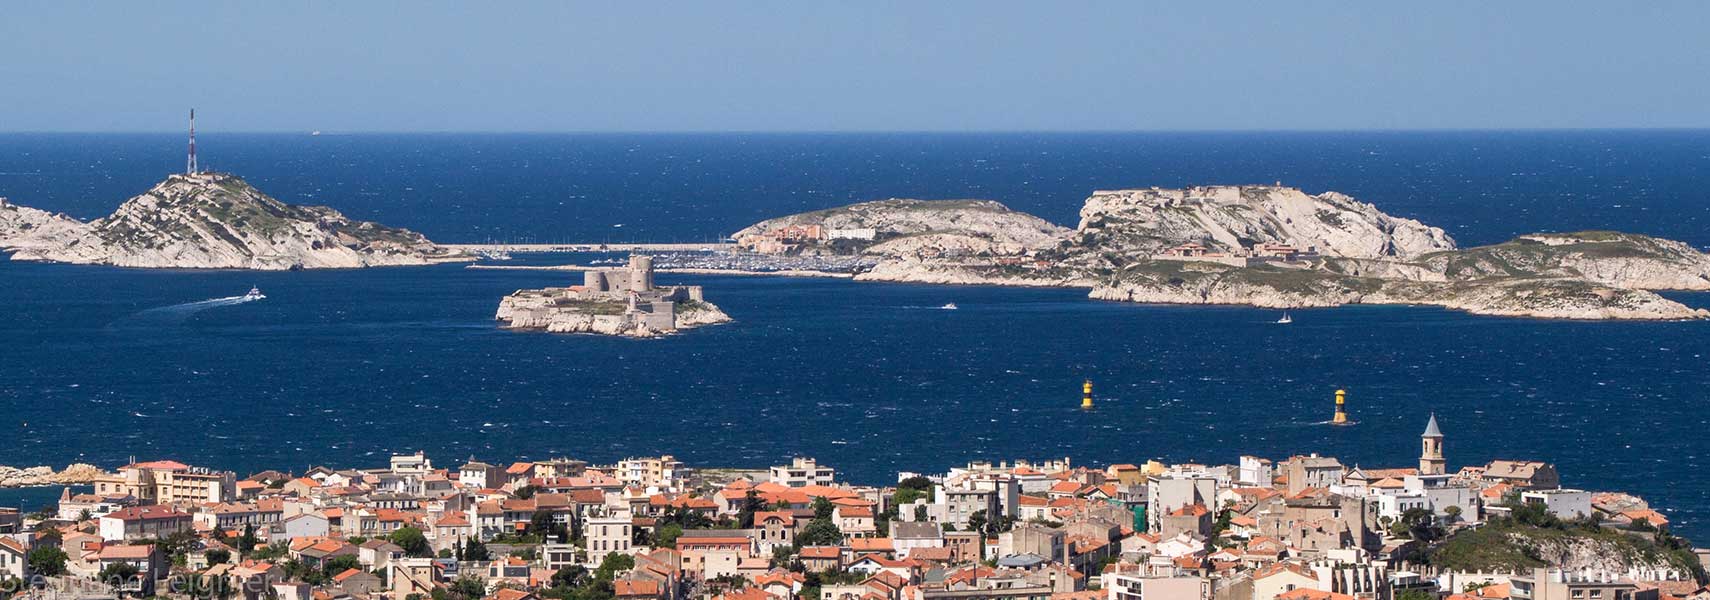 Google Map of Marseille, France - Nations Online Project